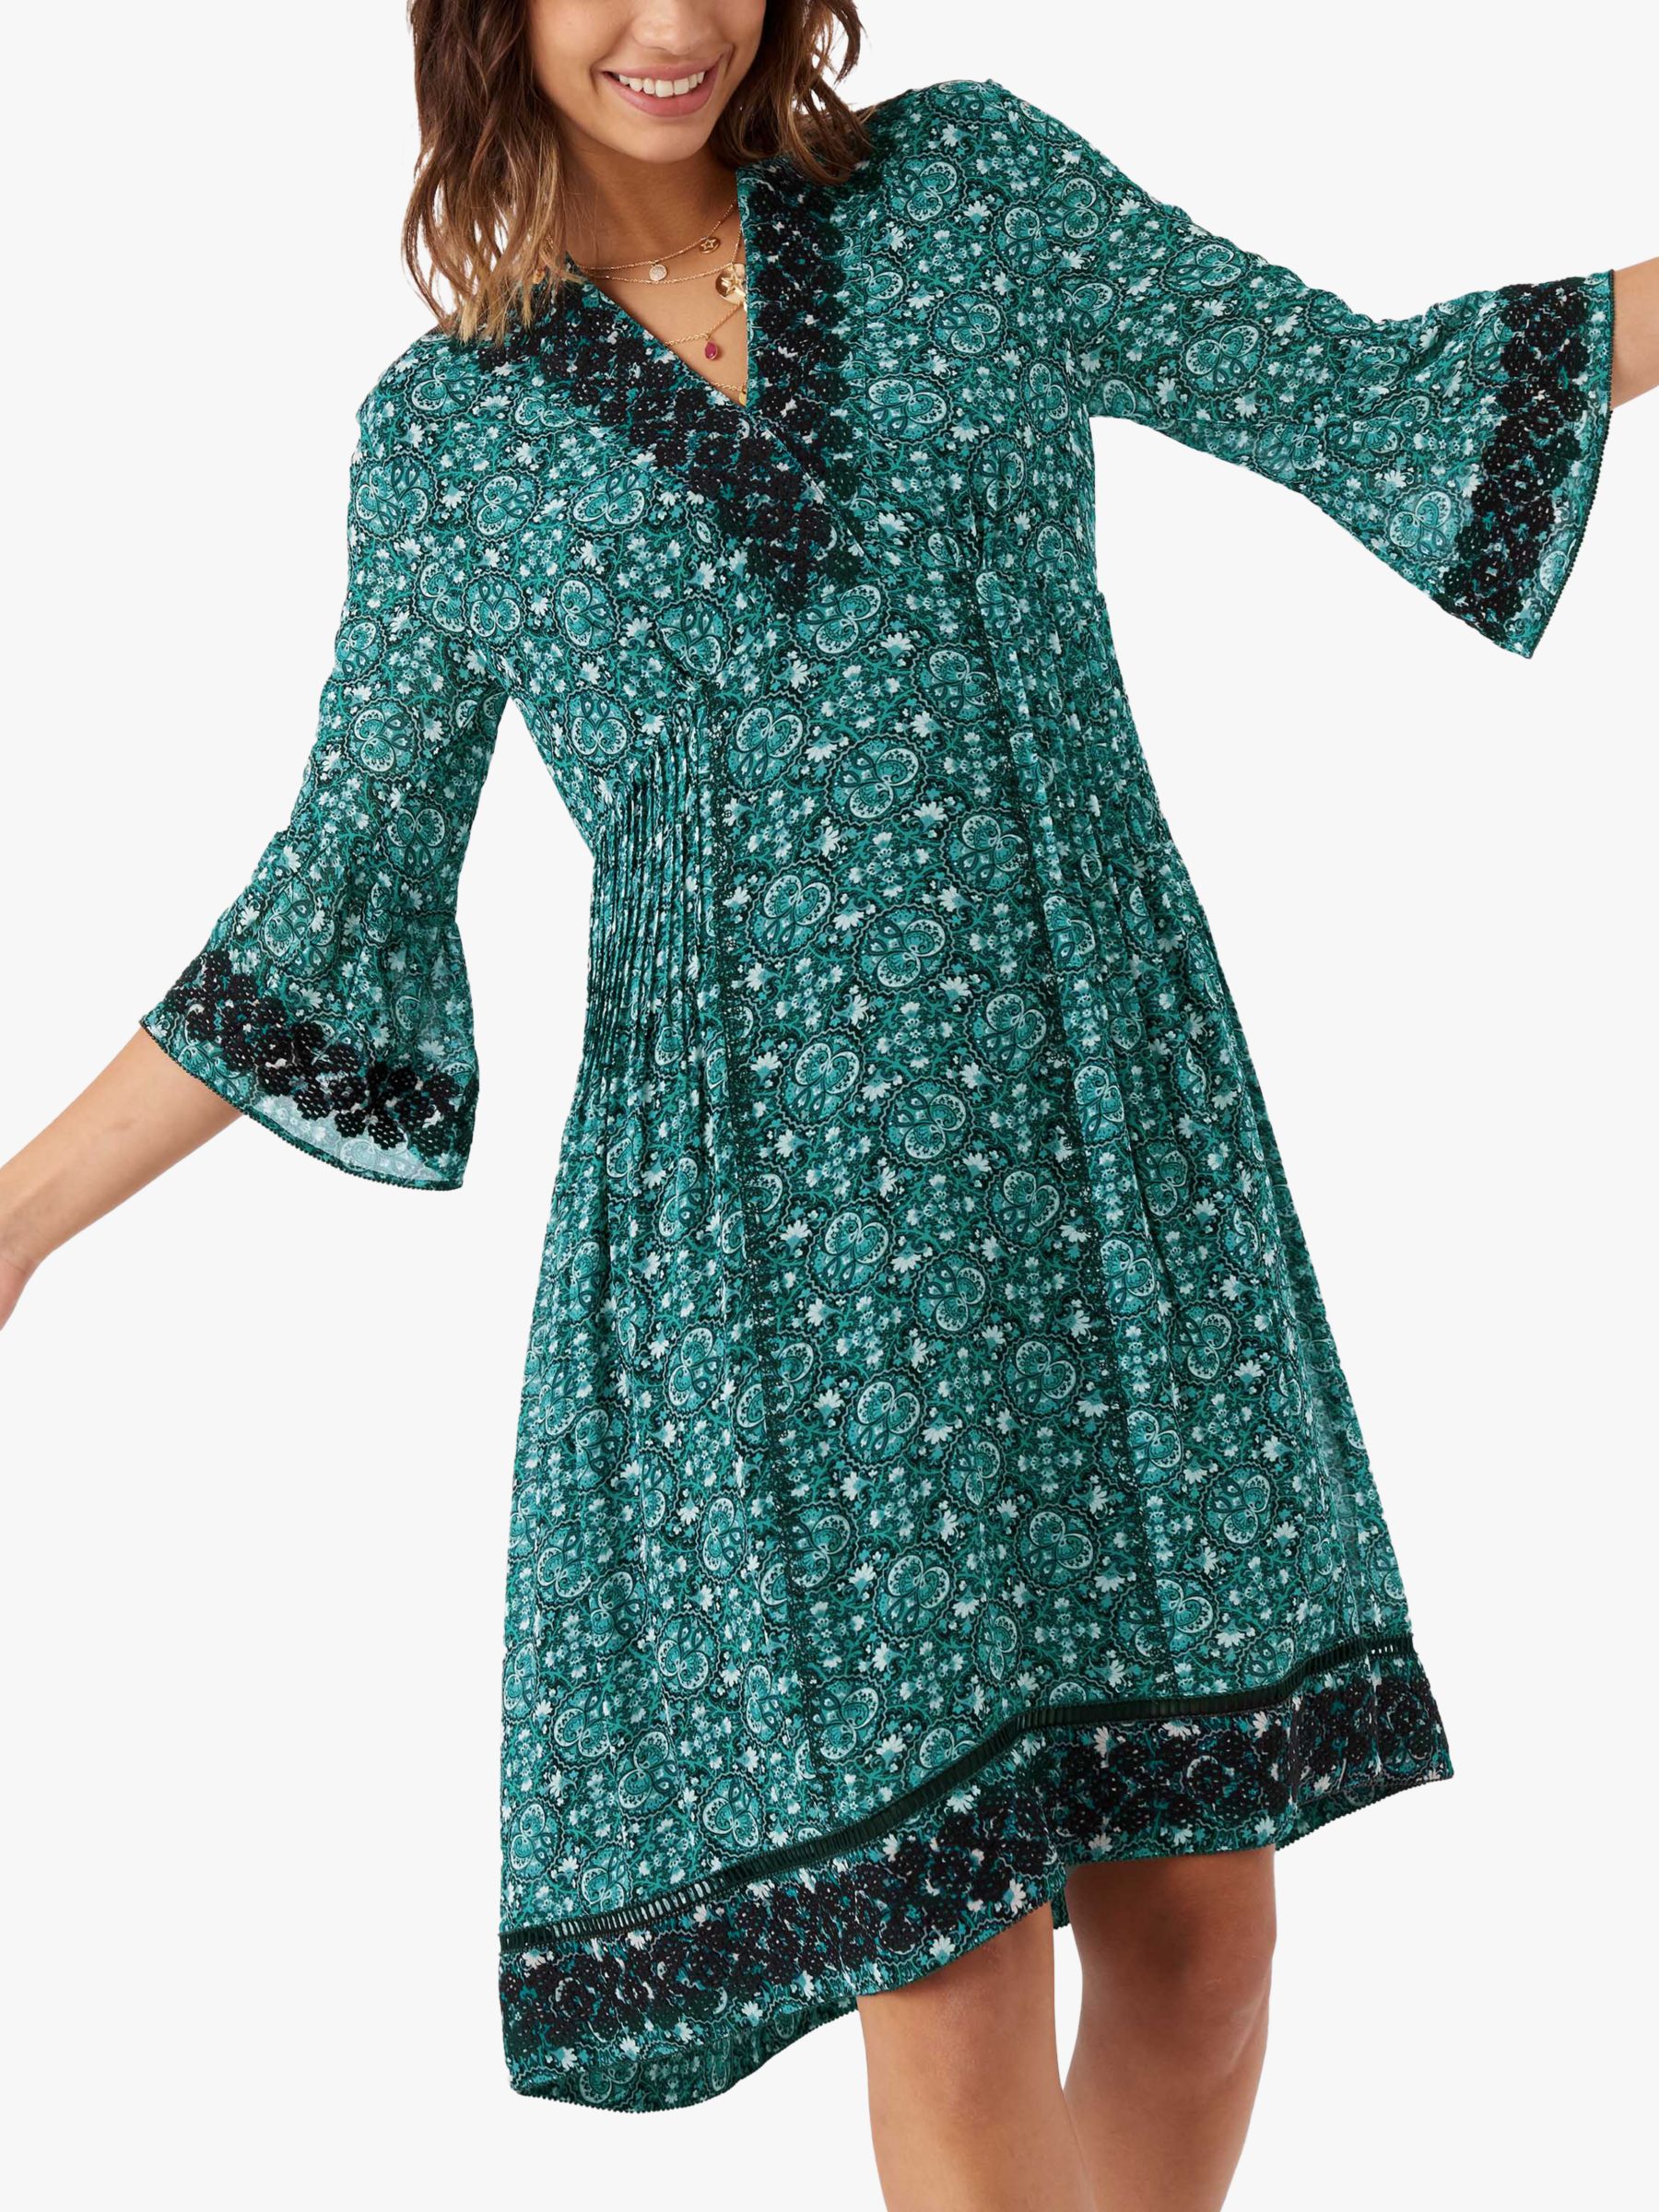 Brora Abstract Floral Print Embellished Silk Dress, Emerald